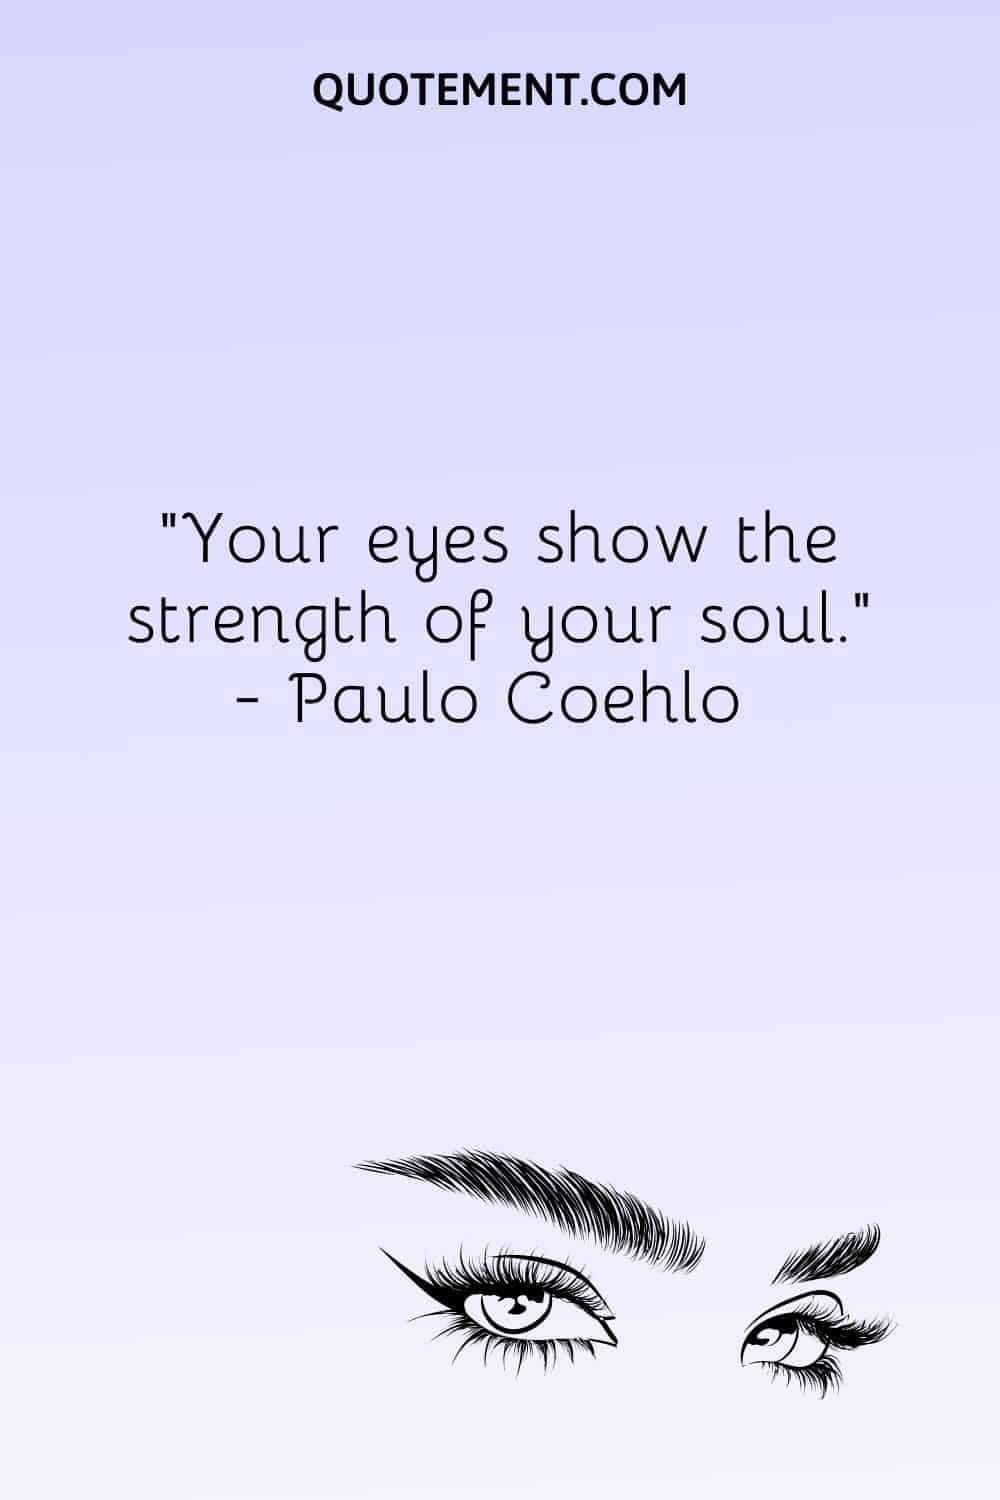 Your eyes show the strength of your soul